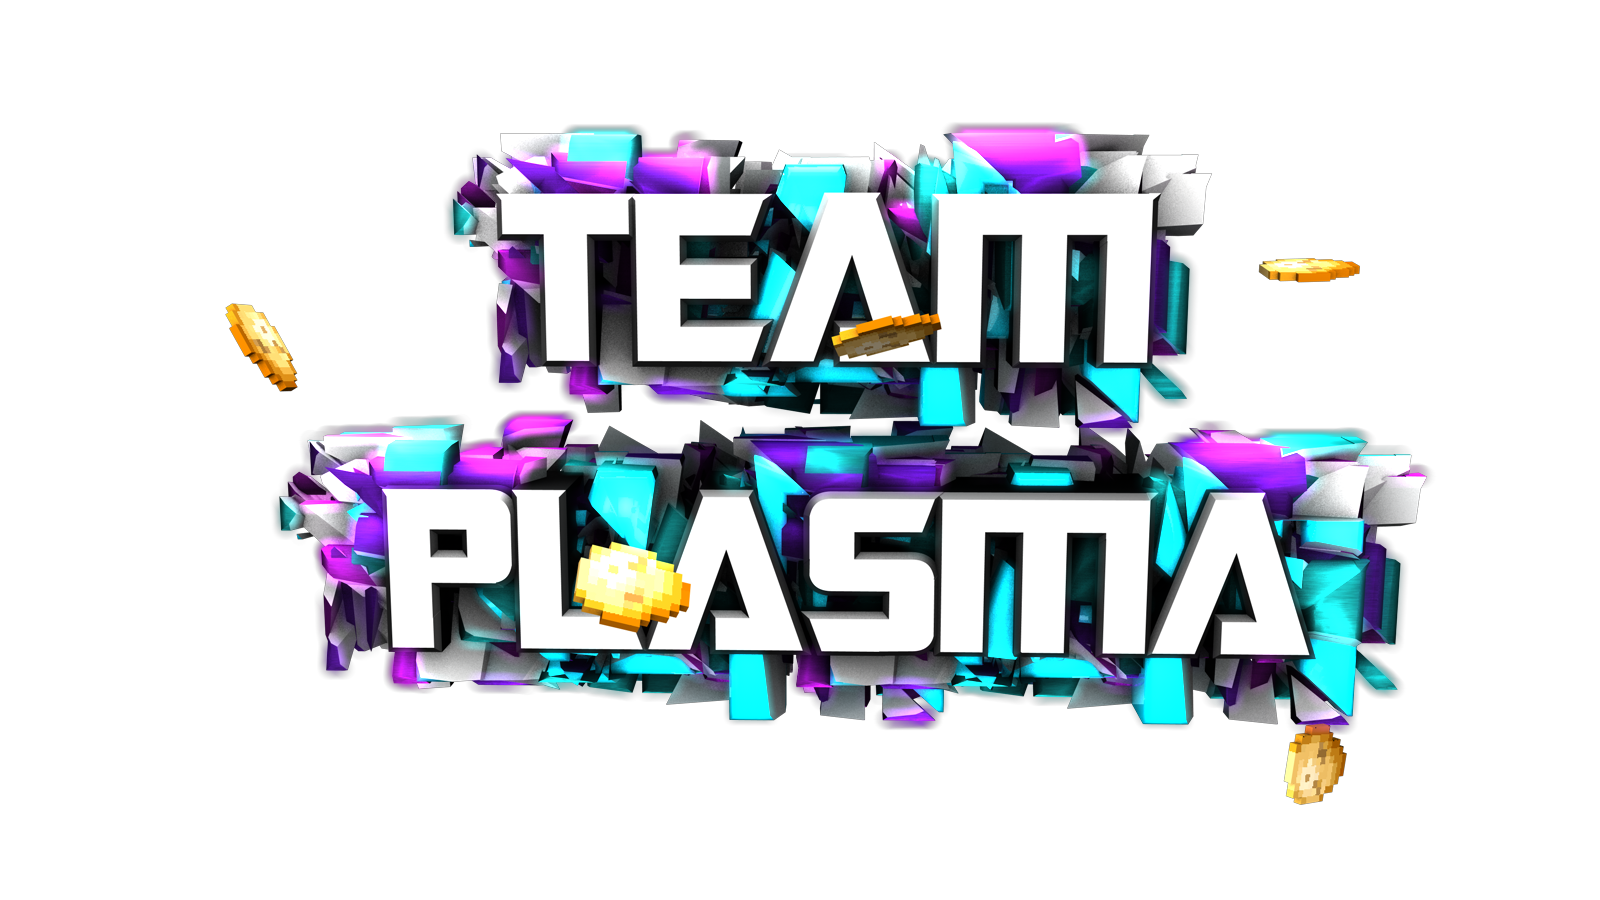 TEAM PLASMA! [CLOSED]- Intros, Channel Art, Drawn Avatars, Thumbnails, Logos, Wallpaper, Outros, Banners, AND MORE! Shops and Requests Your Creation